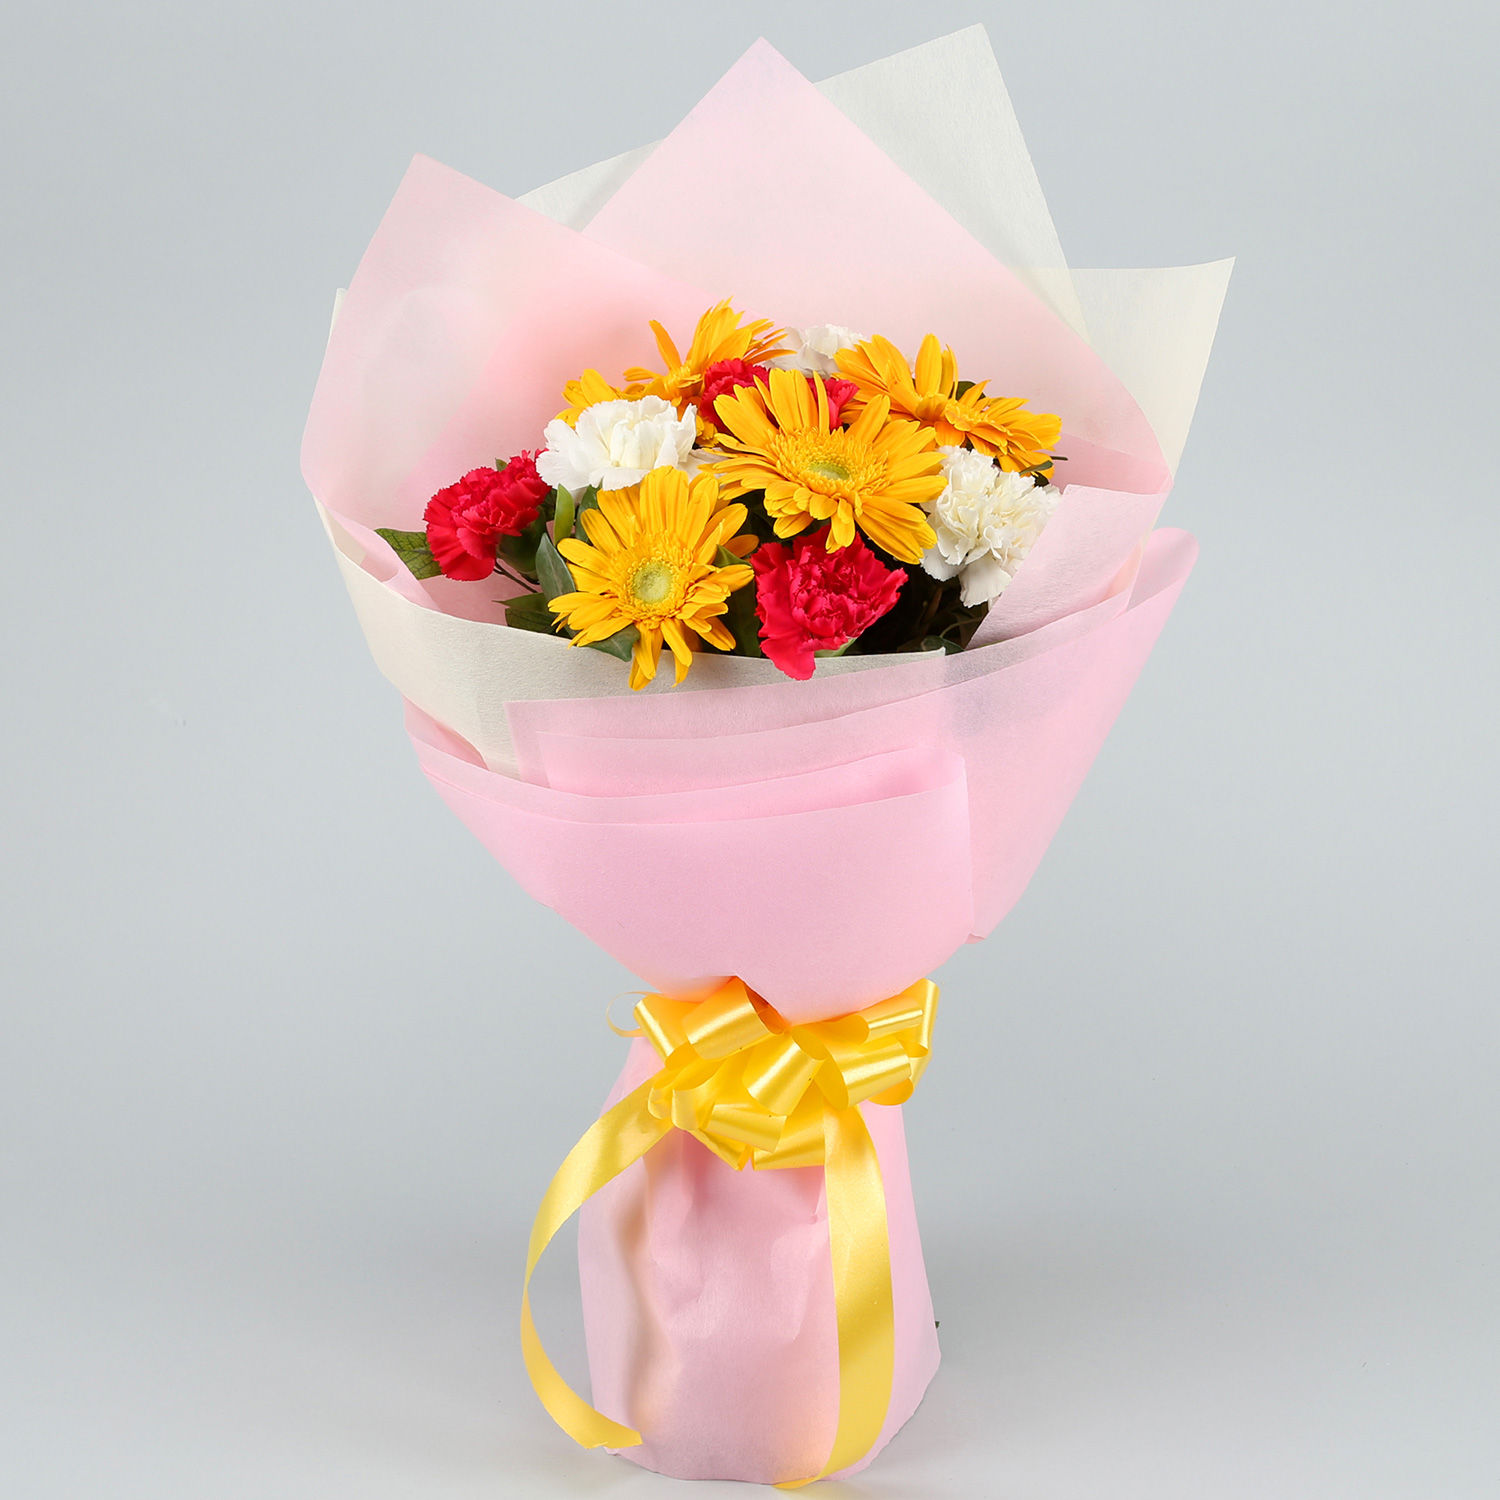 Online Elegant Gerberas Carnations Bouquet Gift Delivery in Singapore - FNP